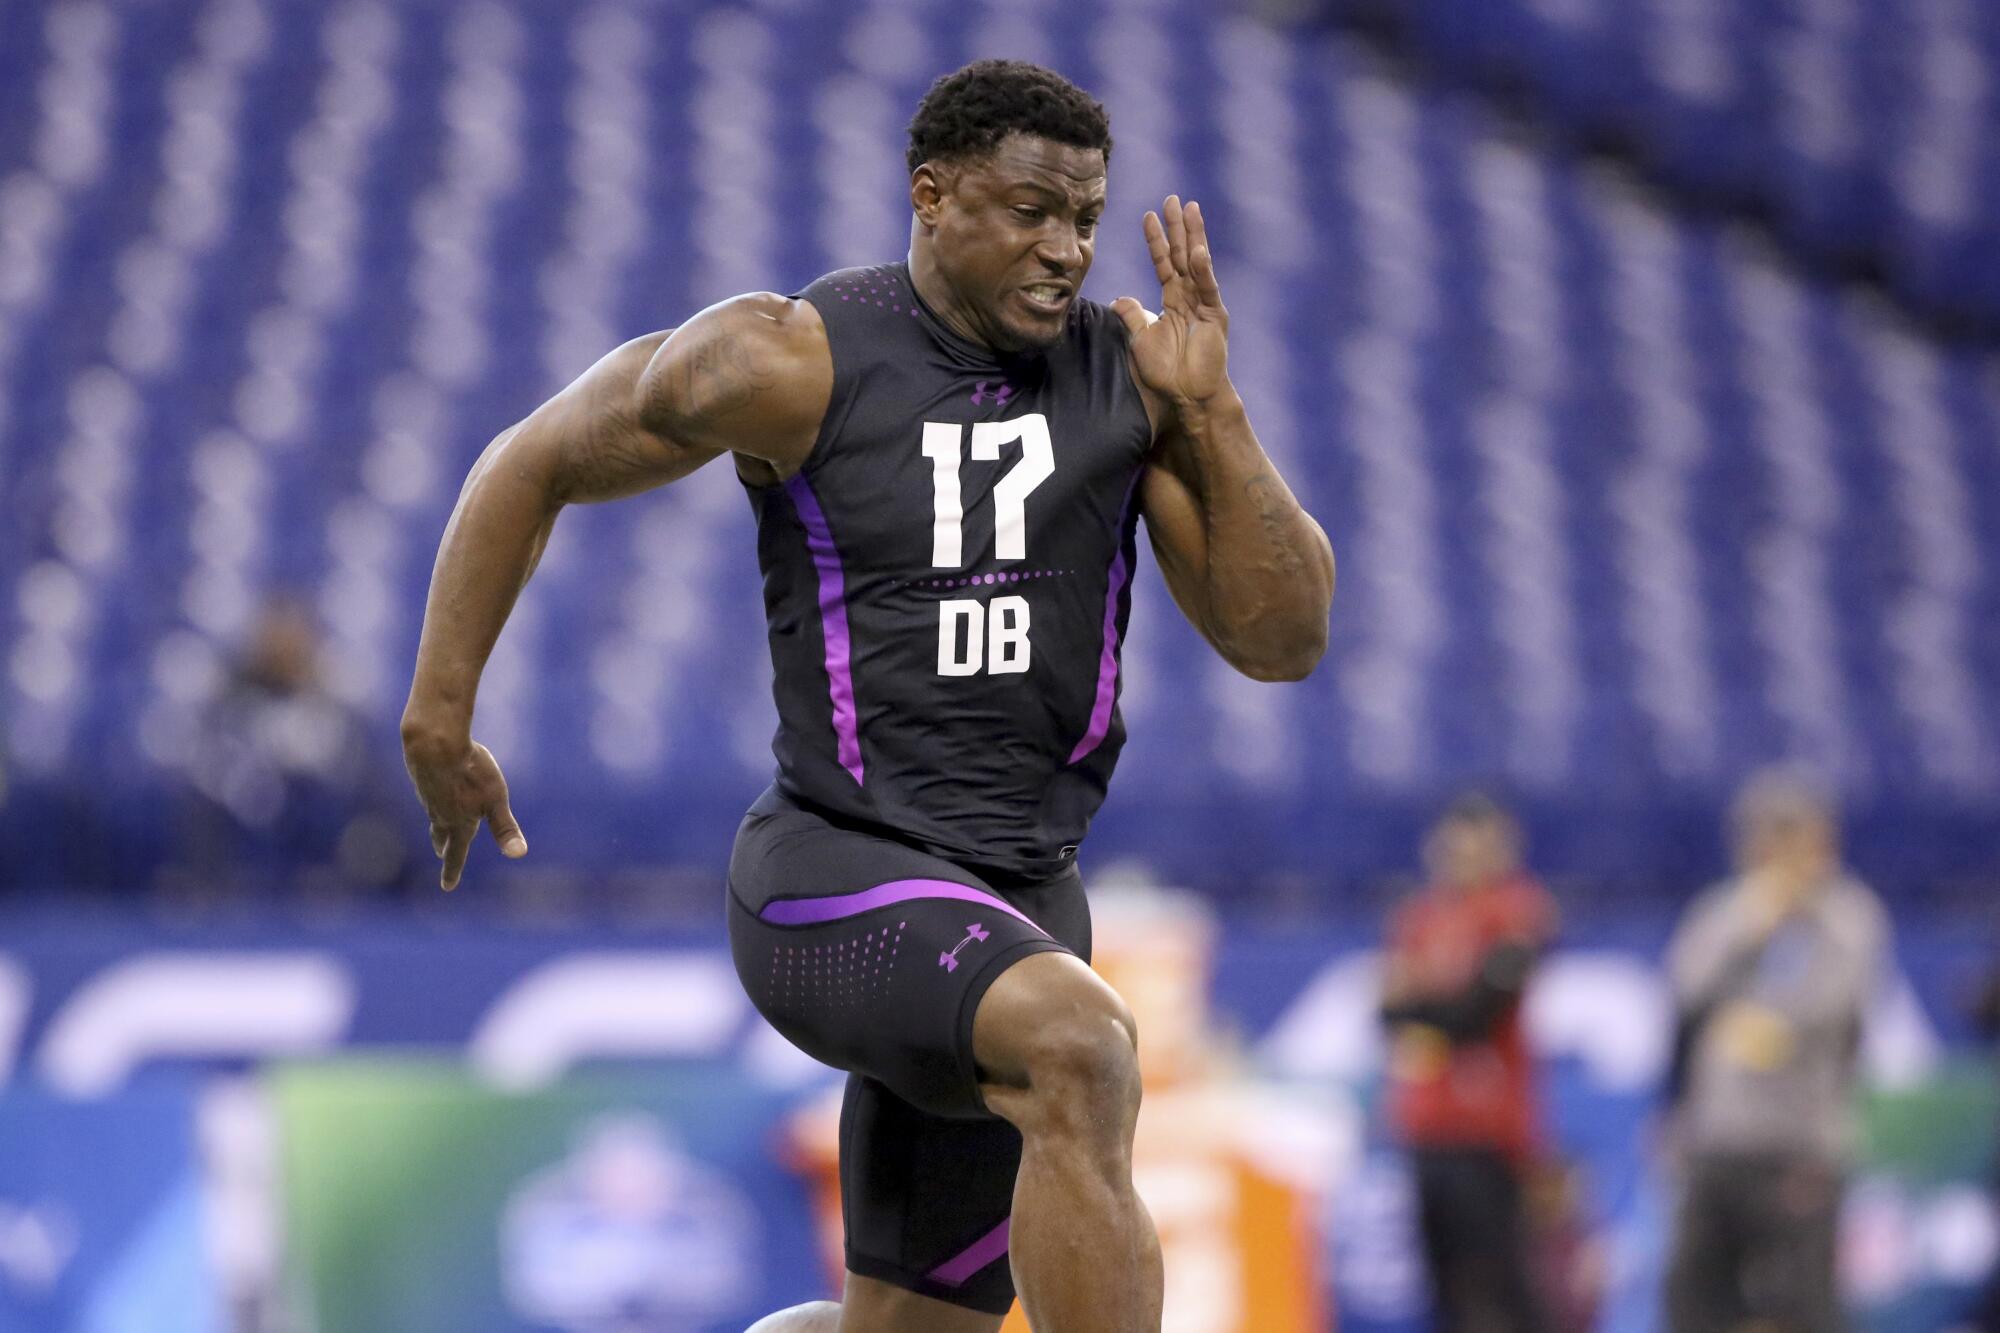 J.C. Jackson runs the 40-yard dash at the 2018 NFL Scouting Combine.